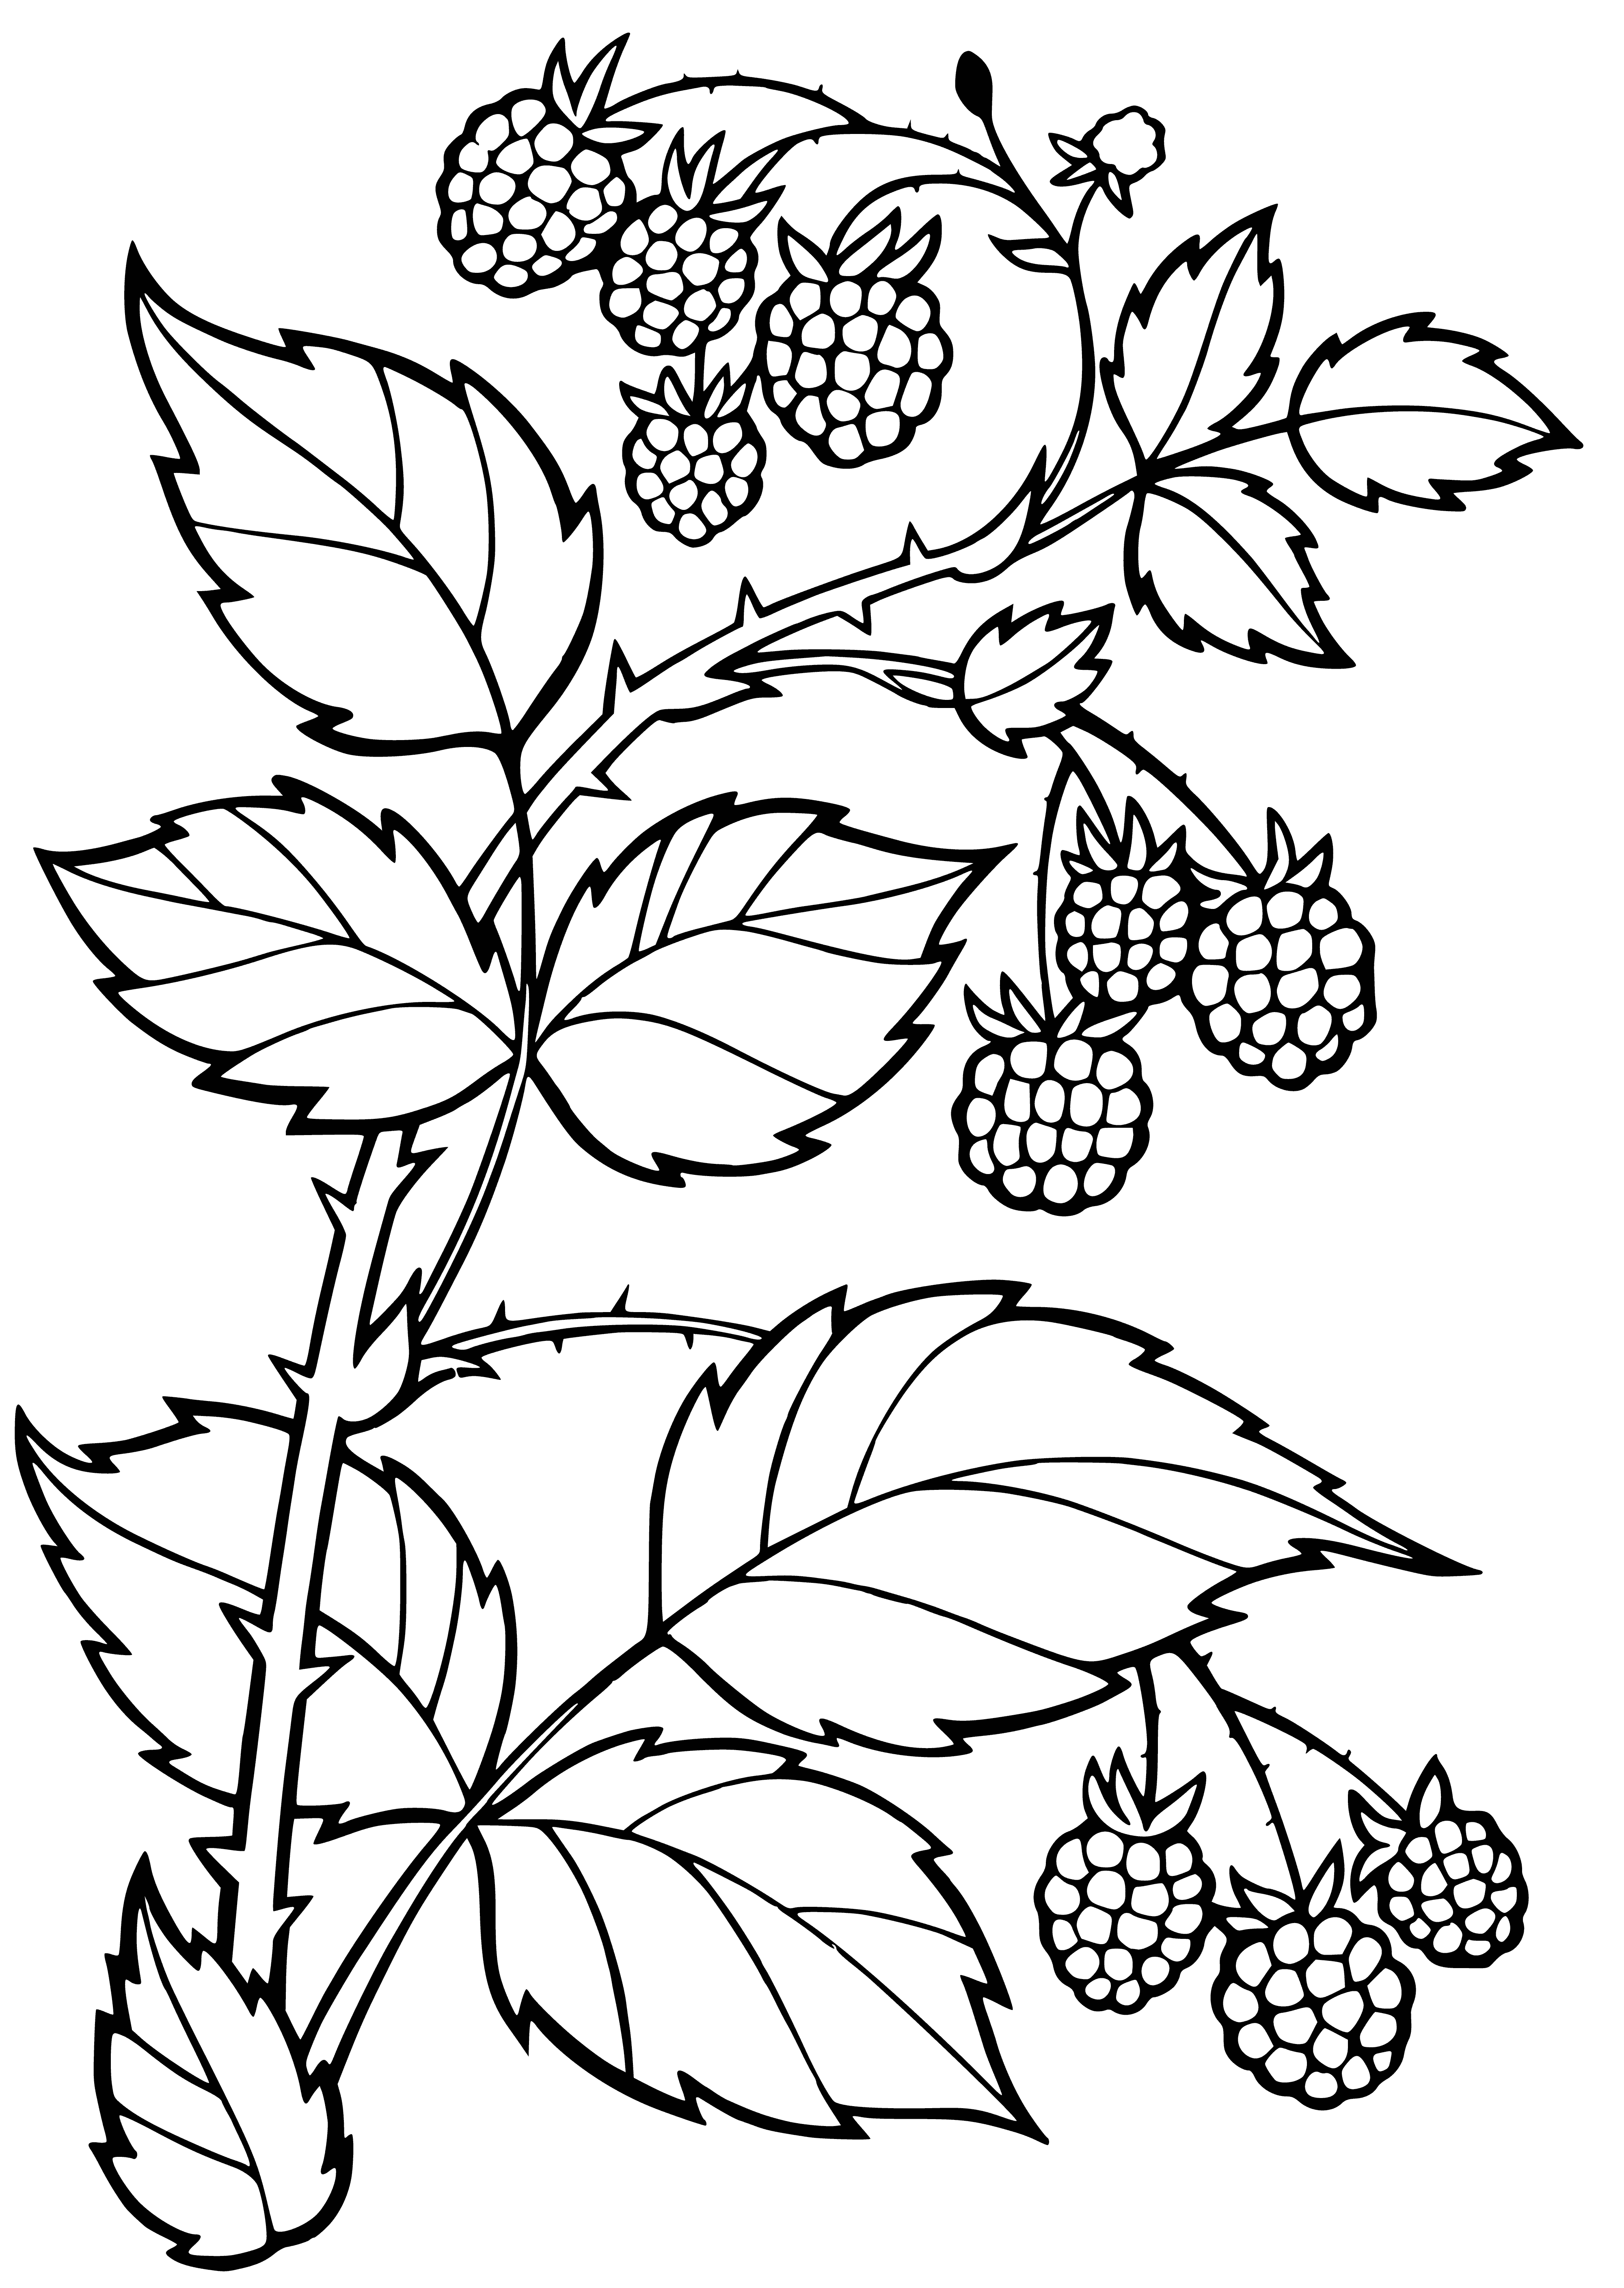 coloring page: Branch with green leaves & red berries - some fallen on the ground. #ColoringPage